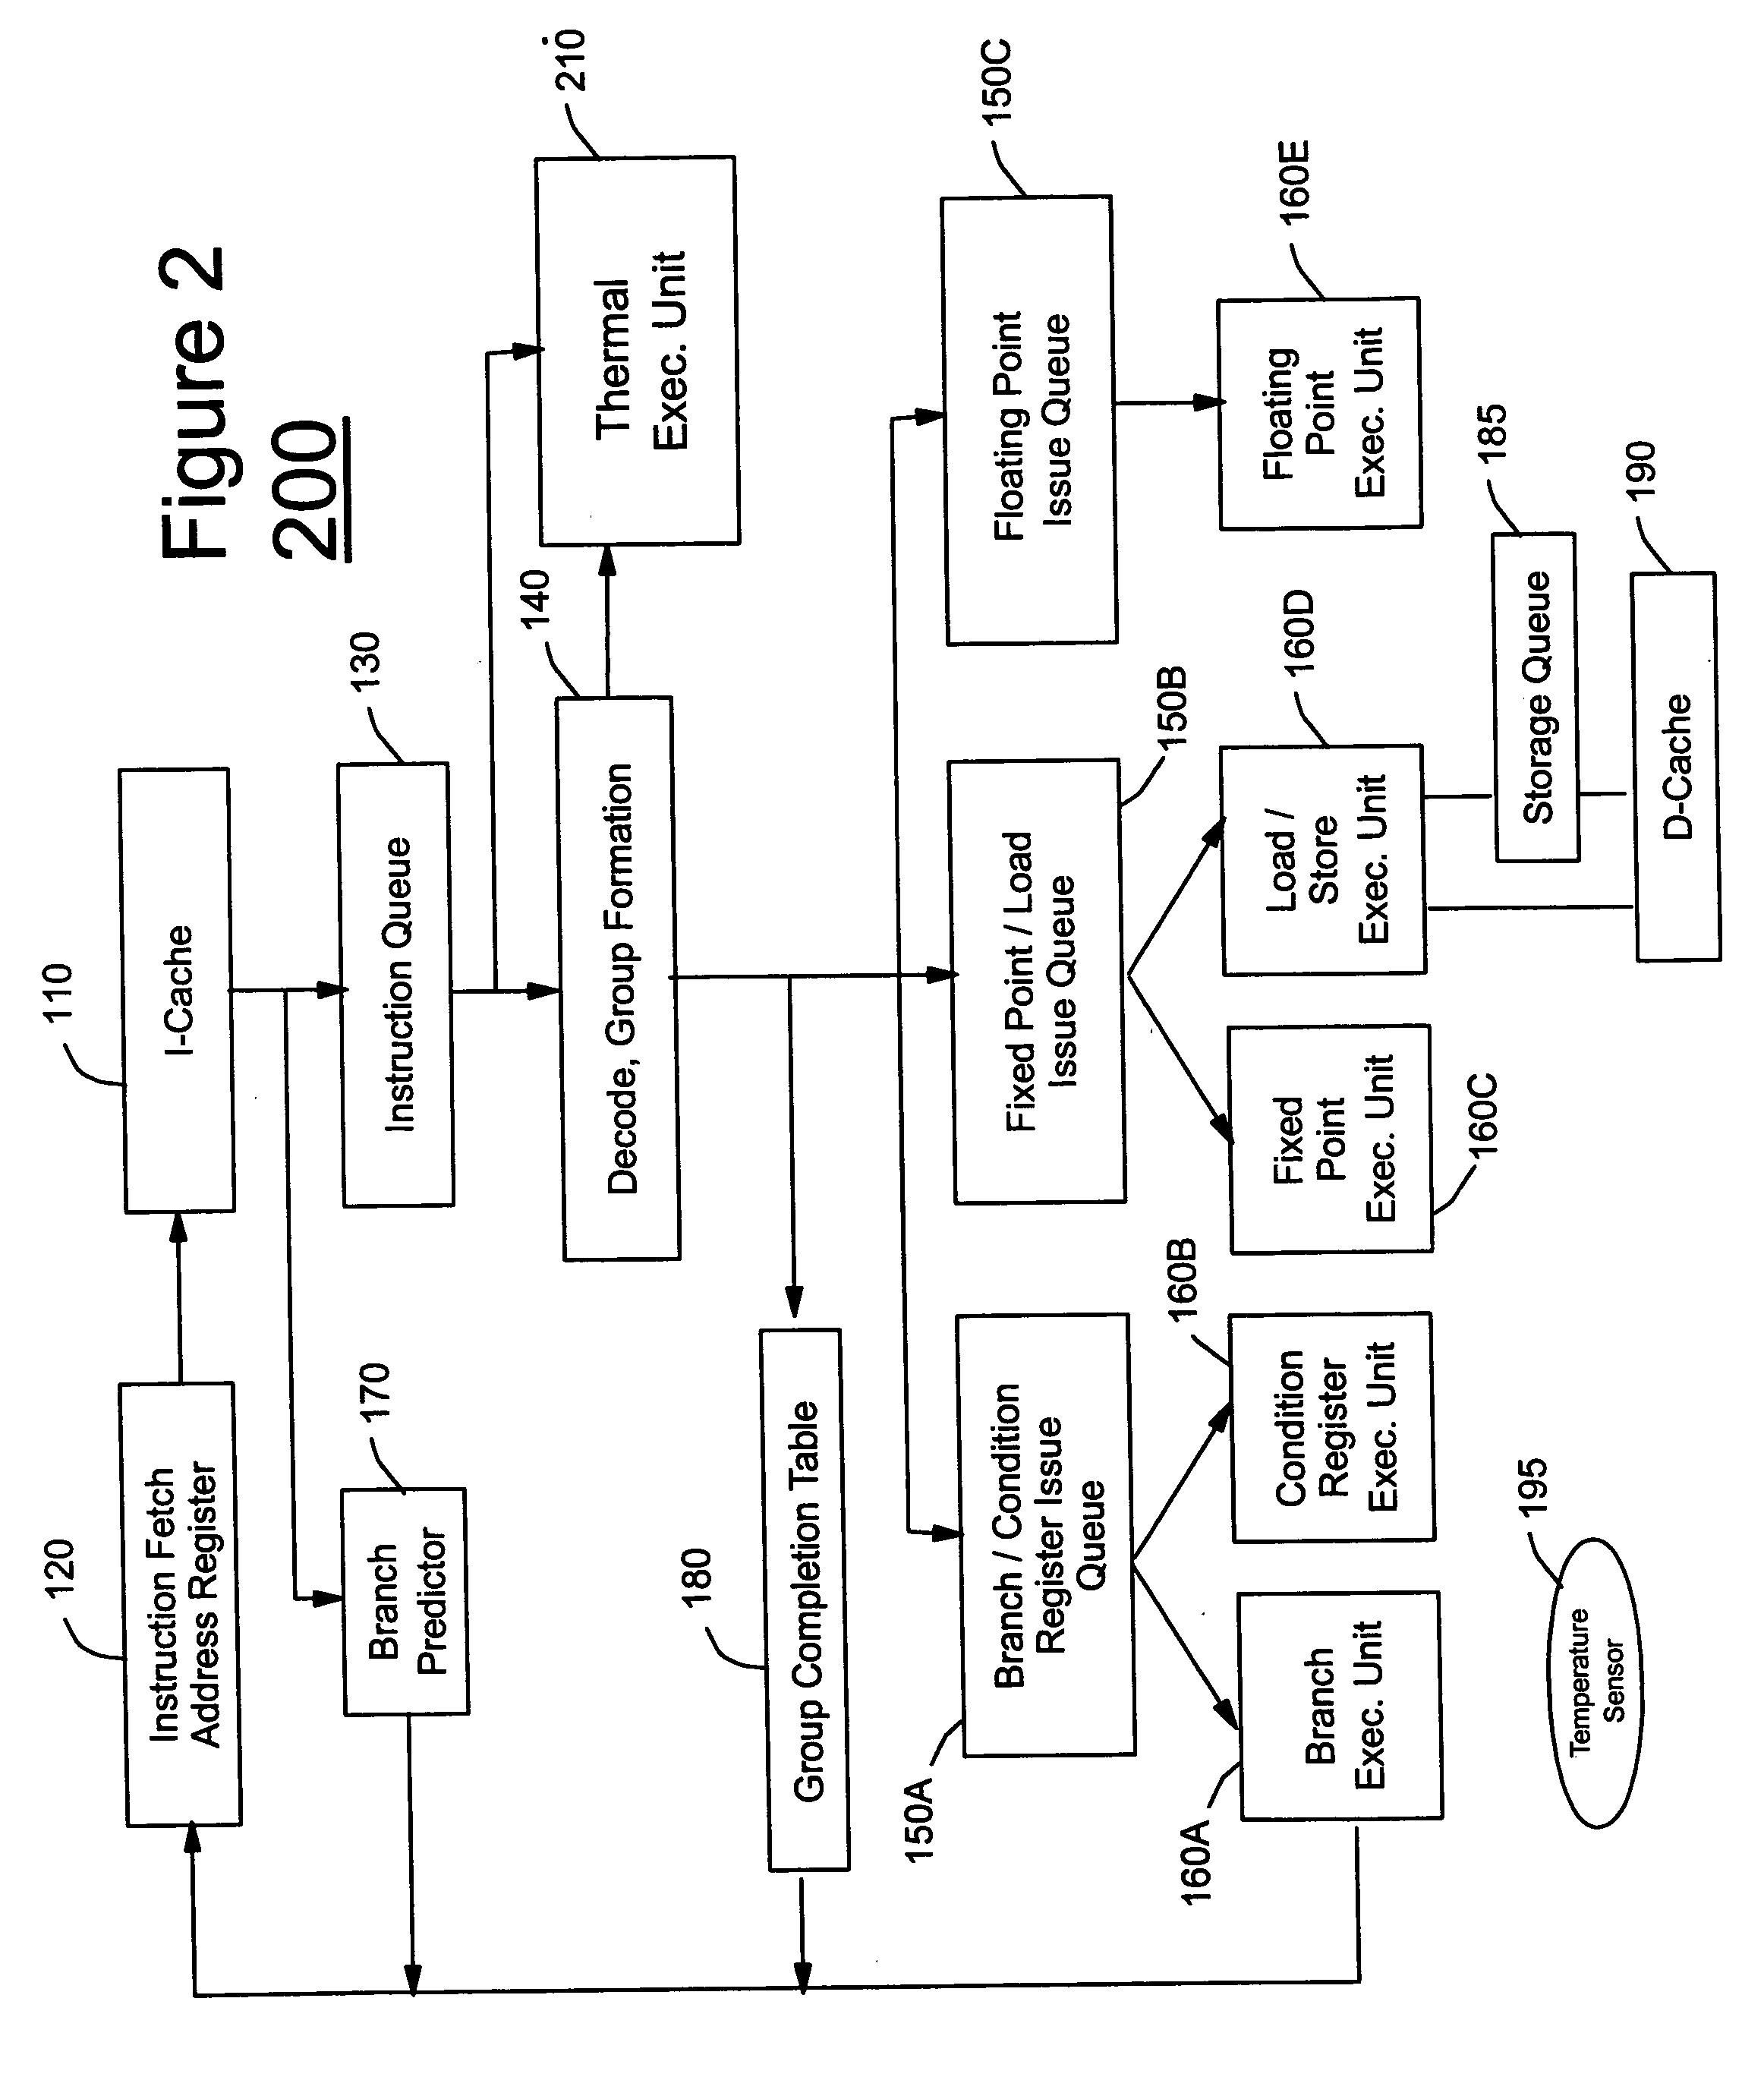 Instruction set with thermal opcode for high-performance microprocessor, microprocessor, and method therefor